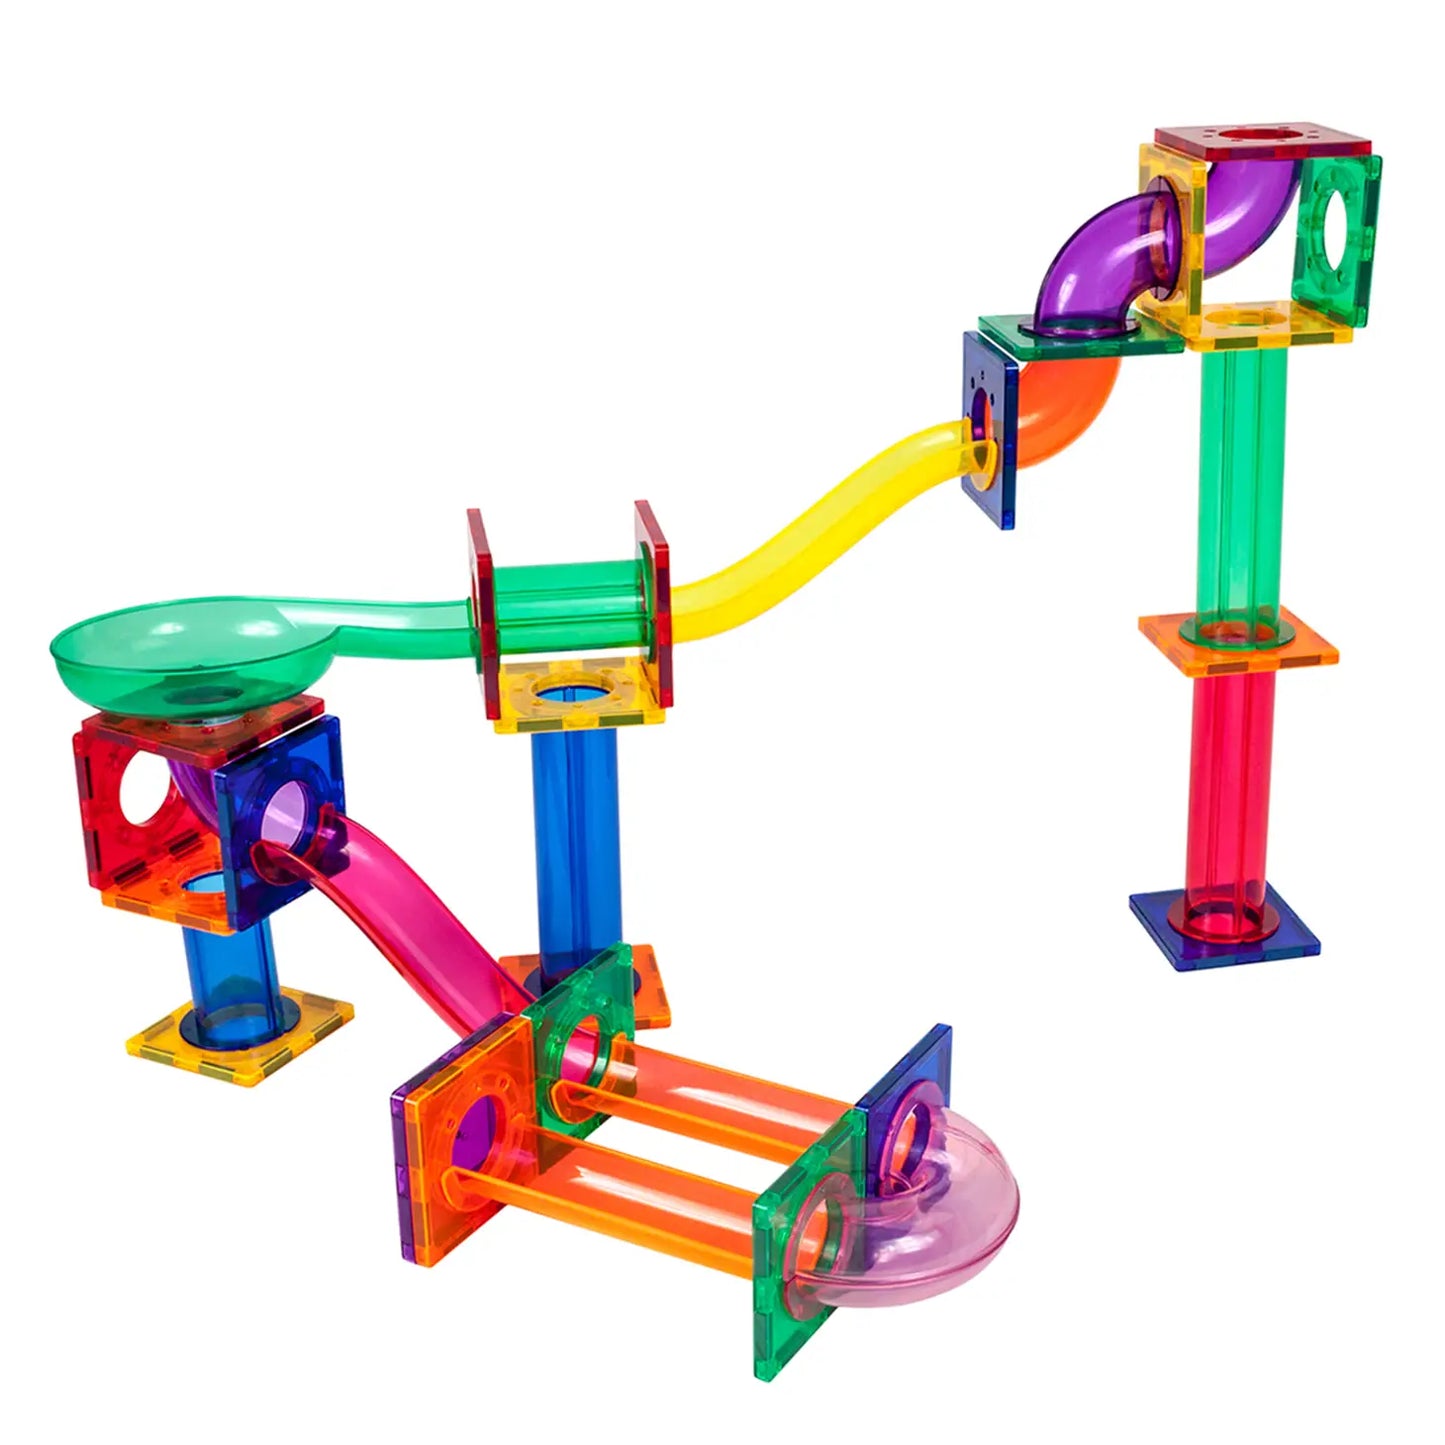 Picasso Tiles Magnetic Marble Run Track- 50 pieces